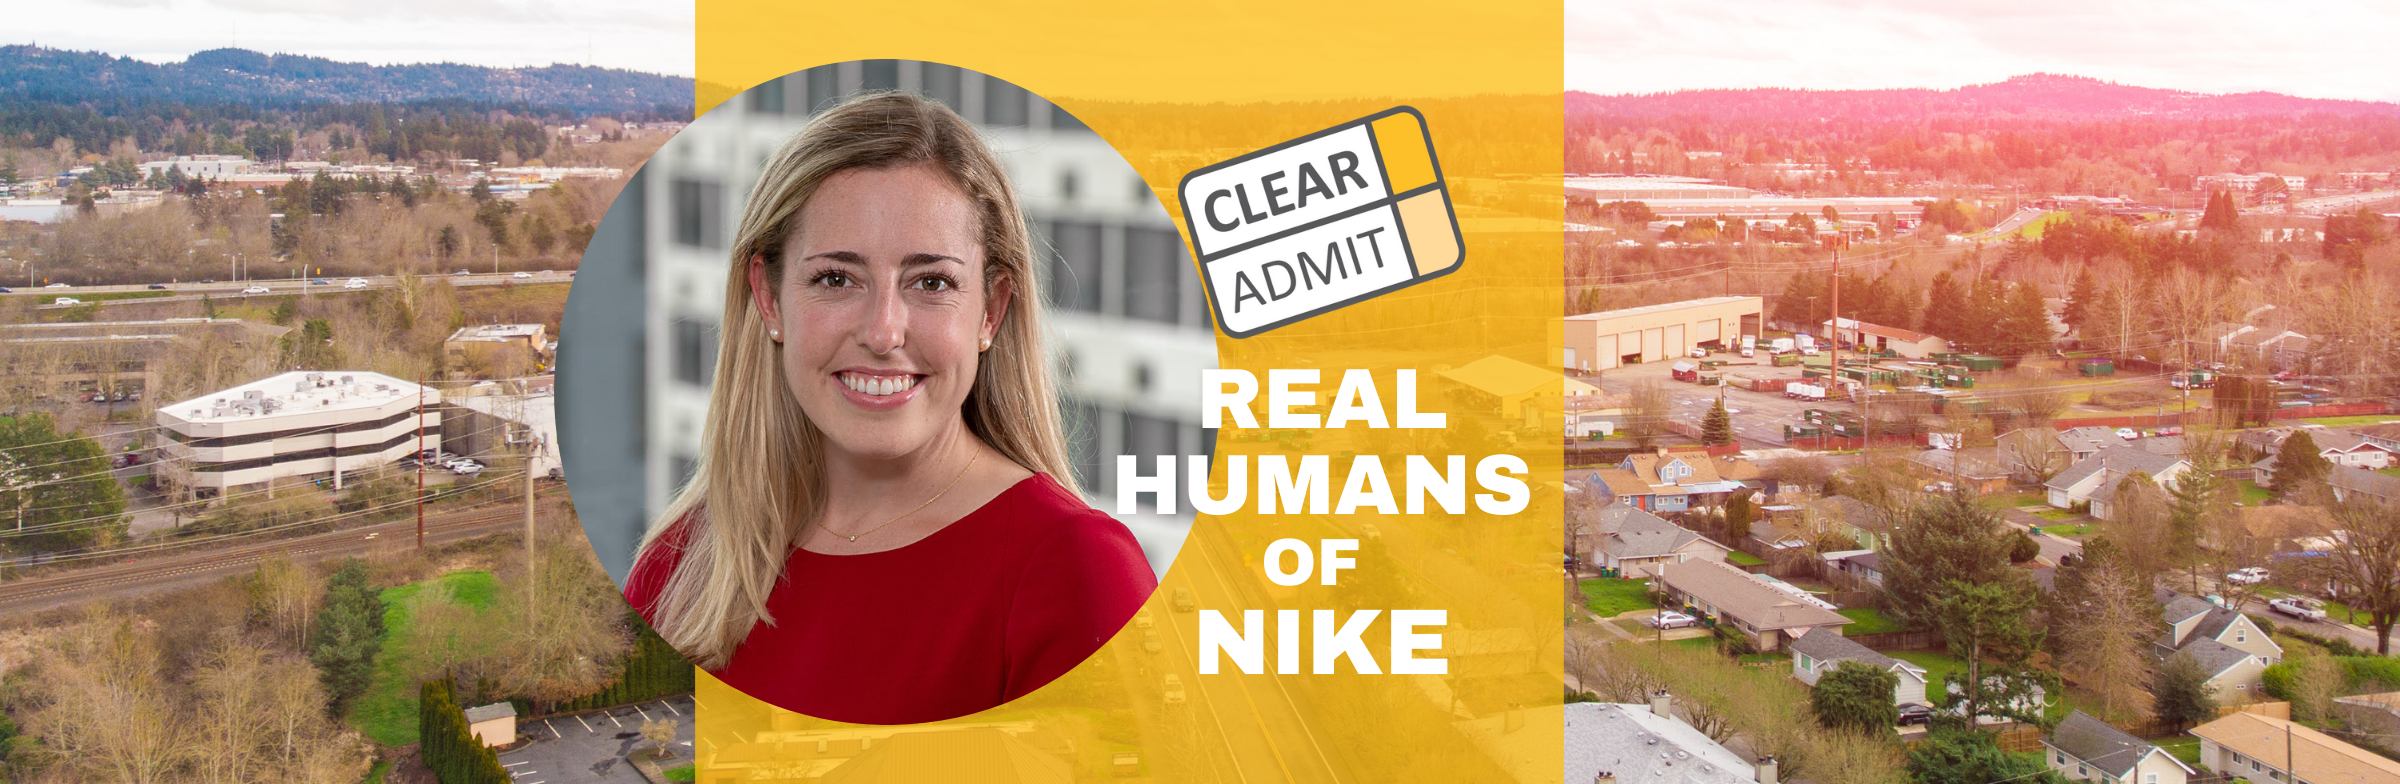 Image for Real Humans of Nike: Margaret Souther, Wharton ’20, Manager of Global Member Growth, Lifecycle Strategy